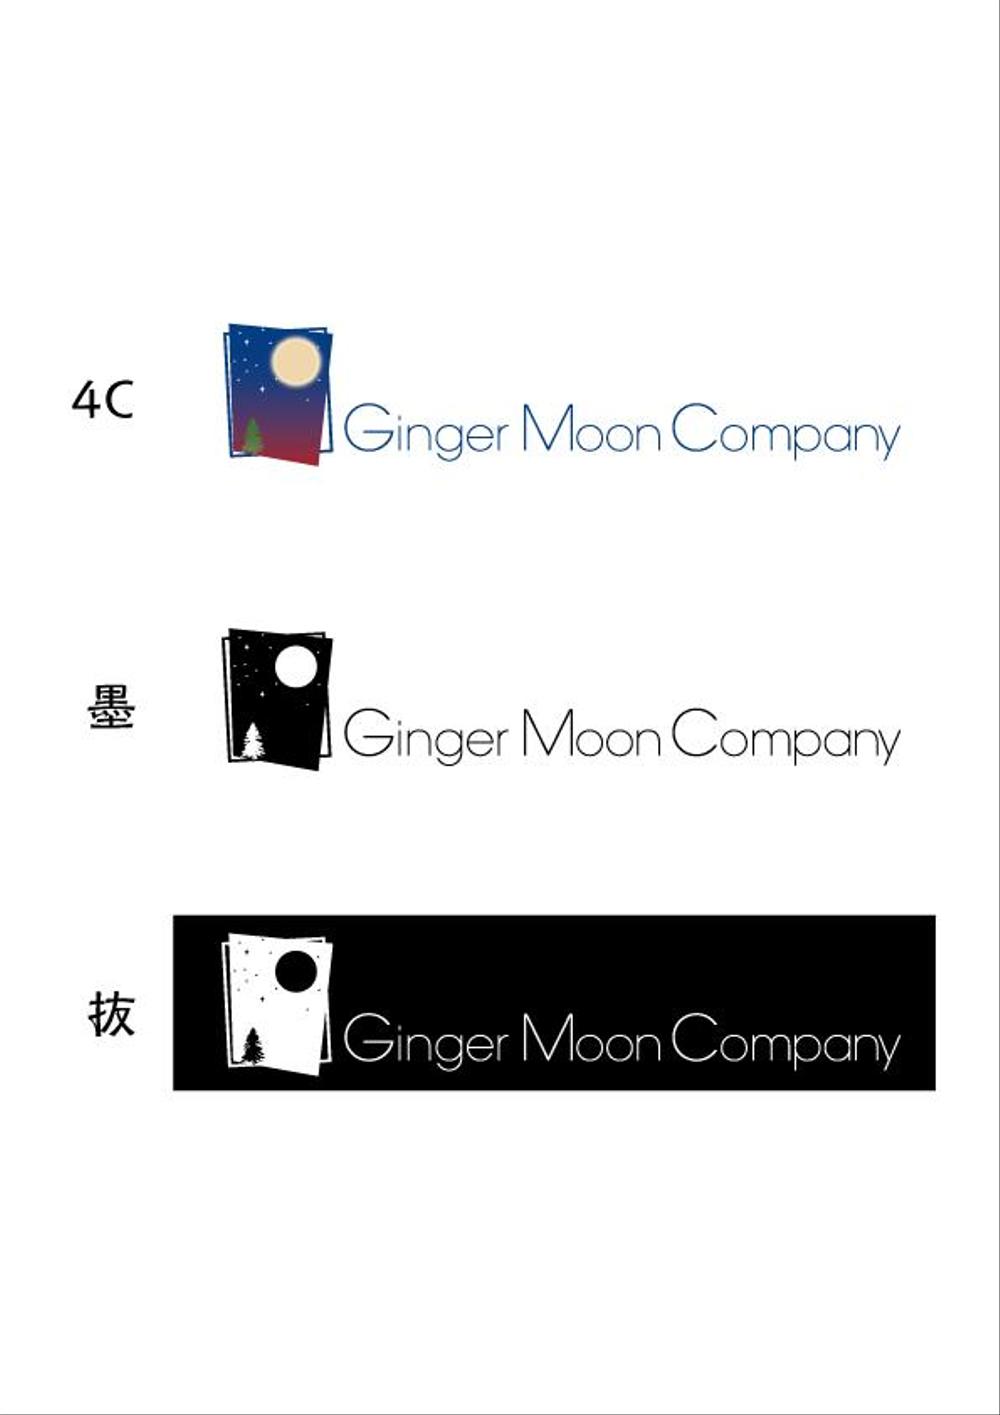 GingerMoonCompany.png